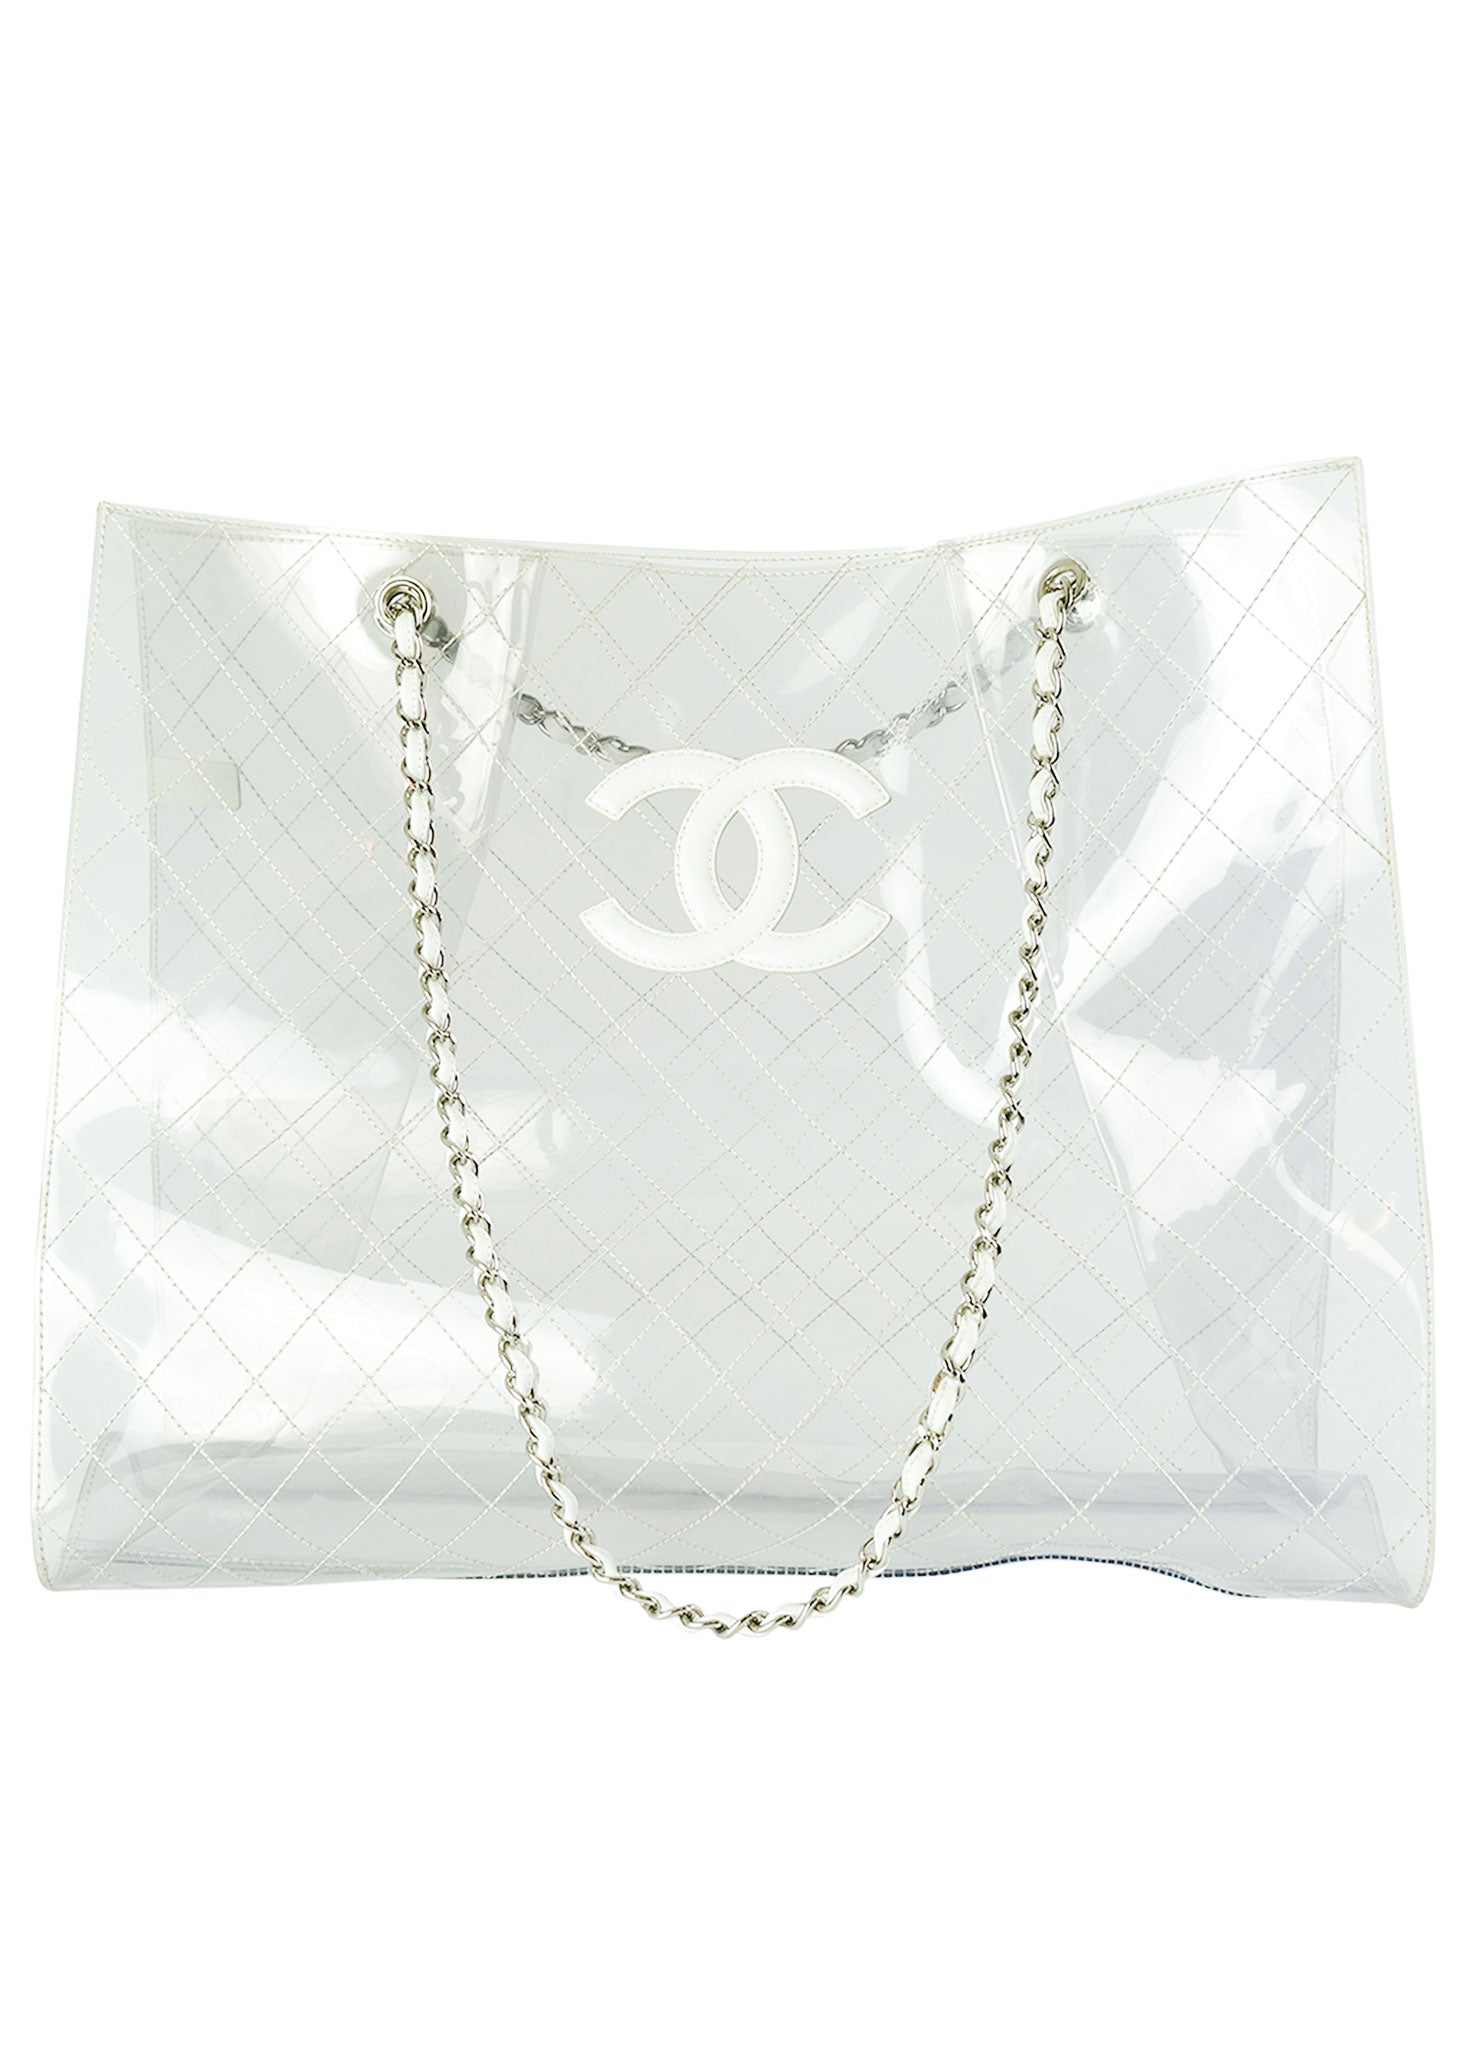 Authentic Chanel Sand By The Sea Transparent Medium Flap Bag Luxury Bags   Wallets on Carousell